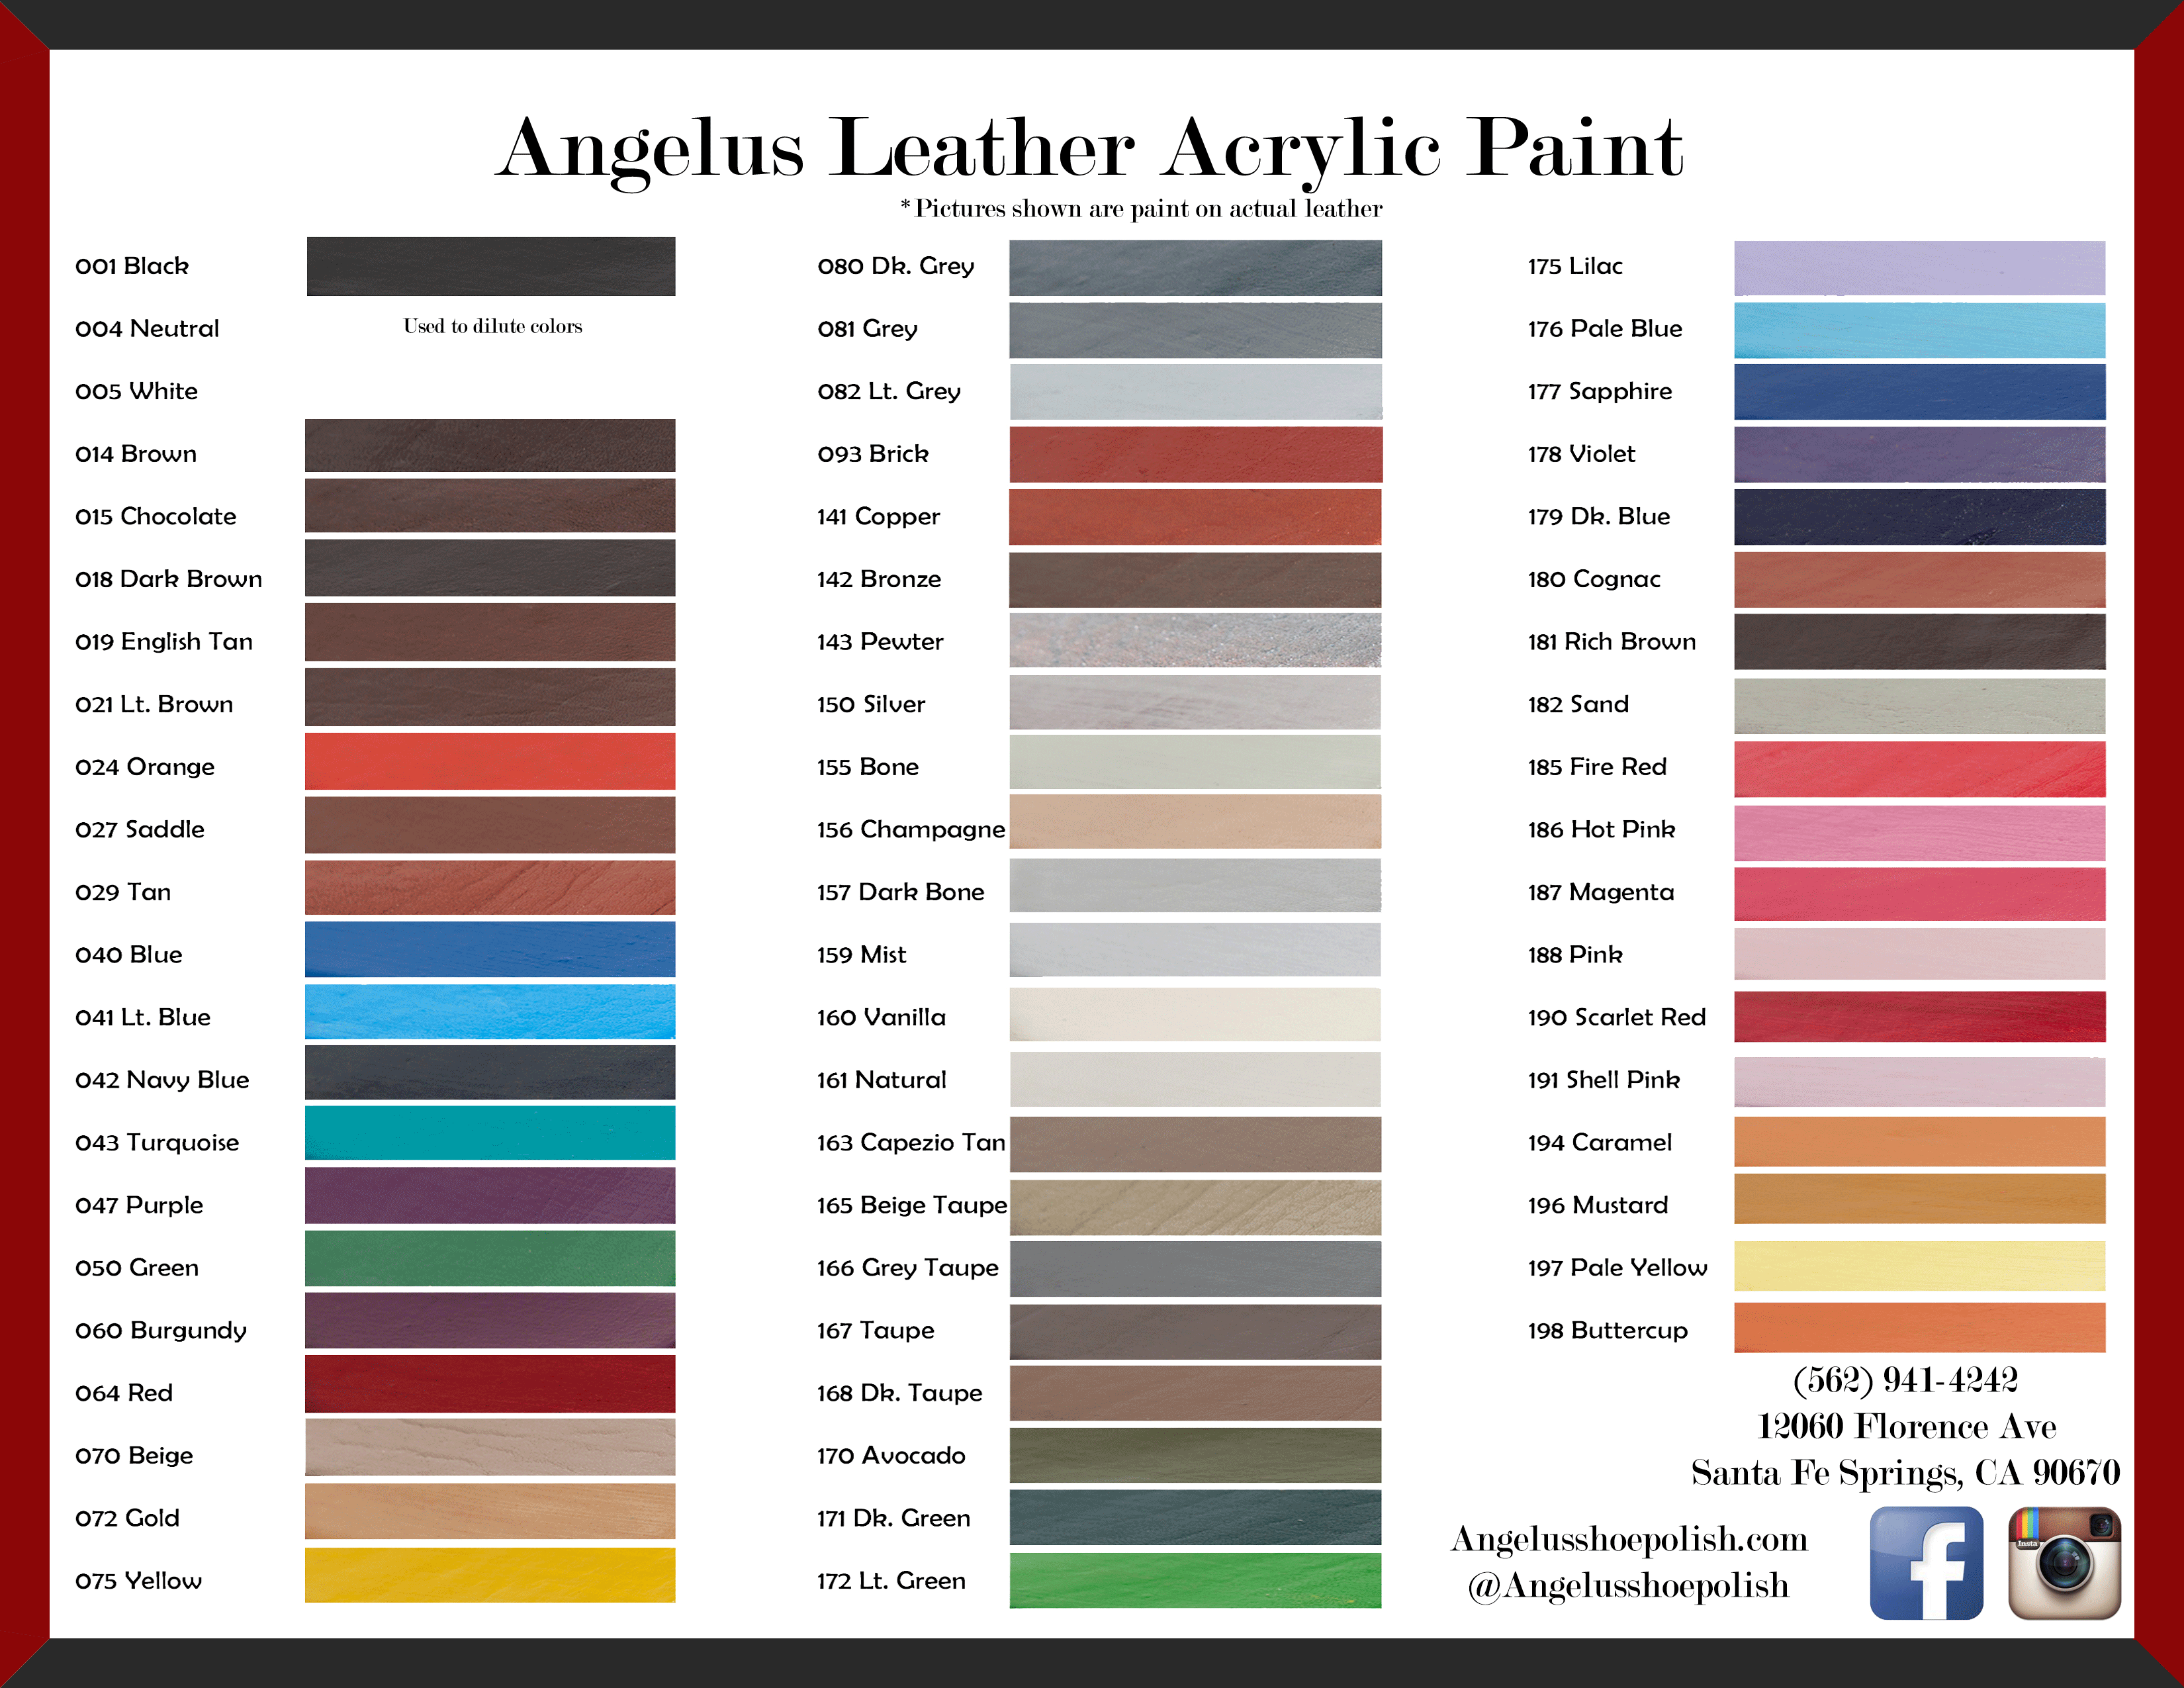 Why use leather acrylics? 